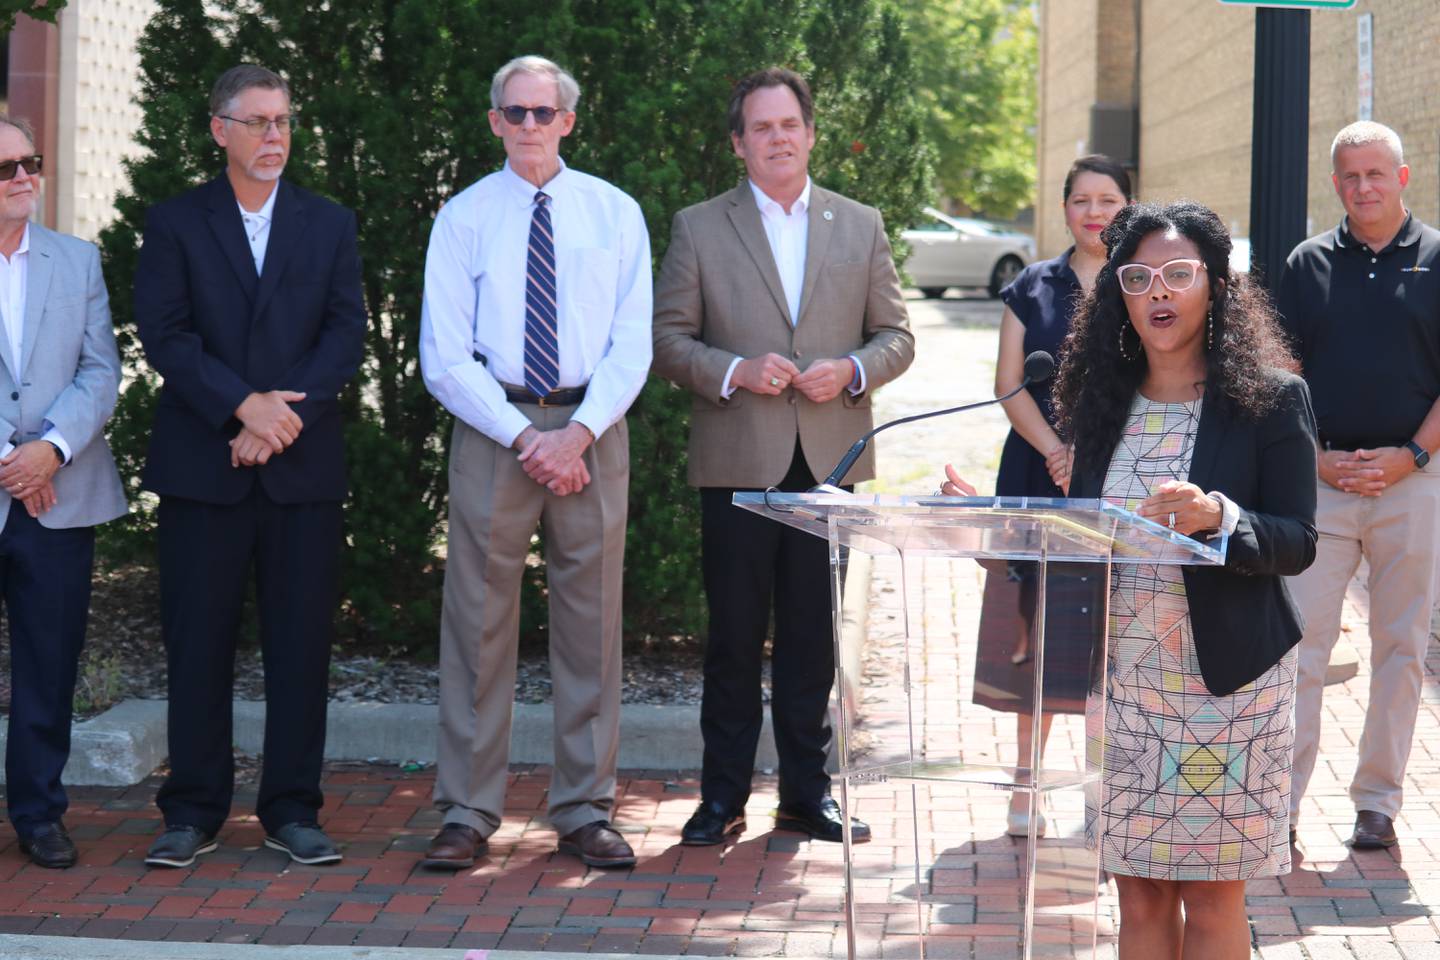 Keisha Parker, vice president of external affairs at ComEd, gives remarks during an Aug. 2, 2022 press conference. The event also featured a ribbon cutting to celebrate the completion of an electric vehicle charging station in the city's downtown